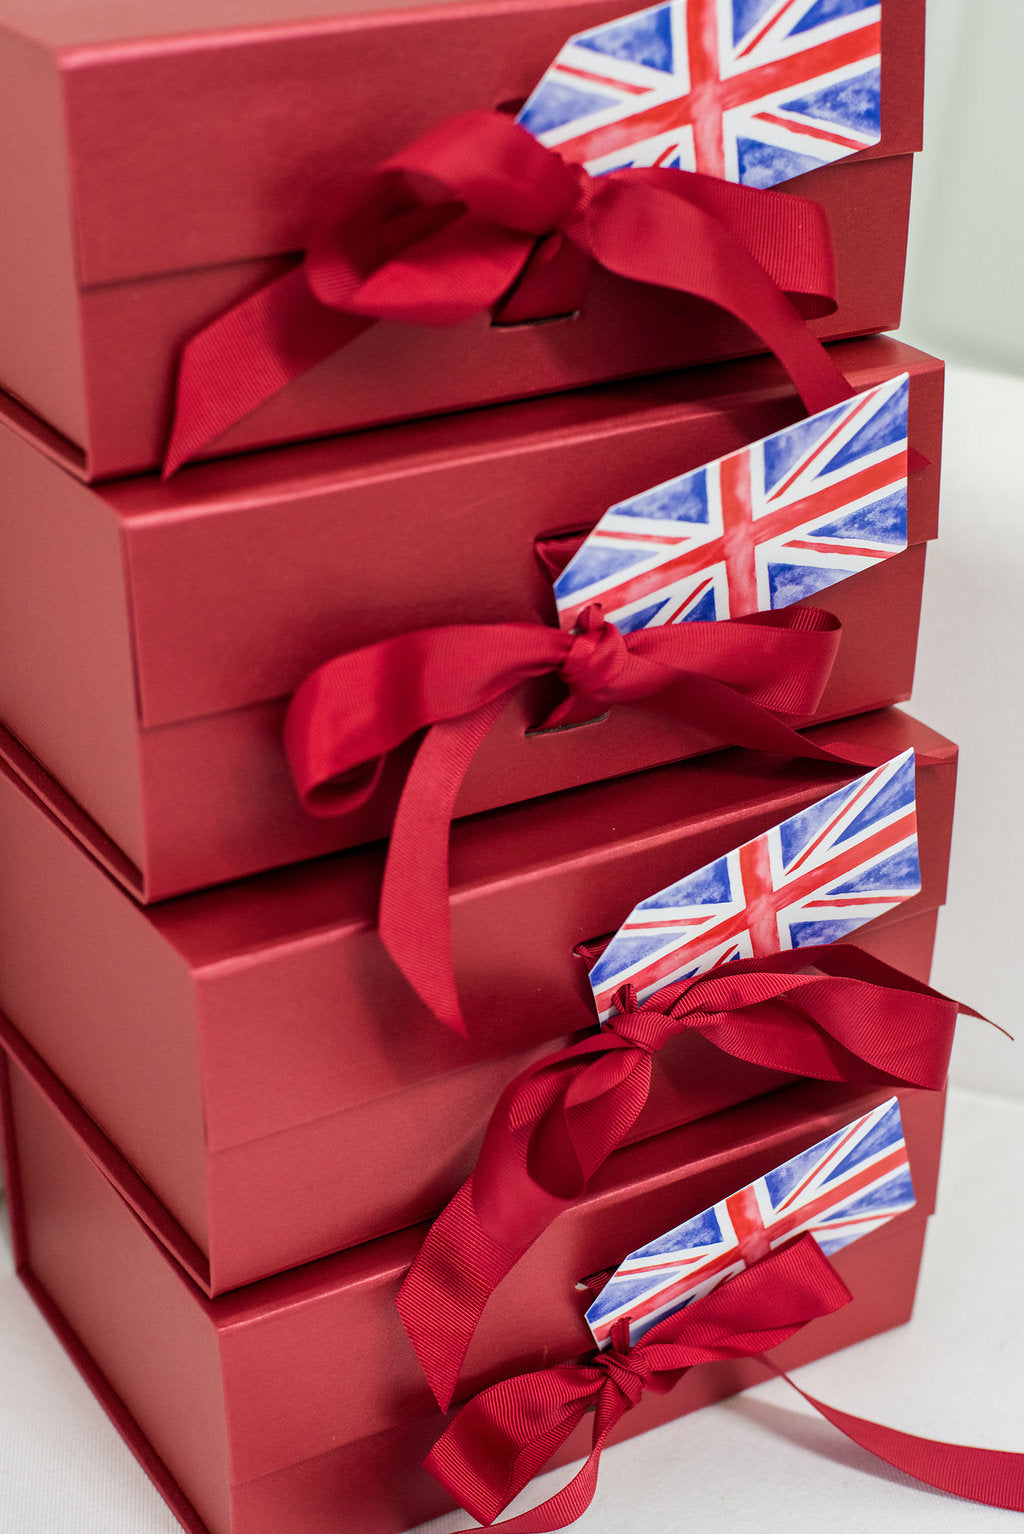 UK corporate event gift boxes